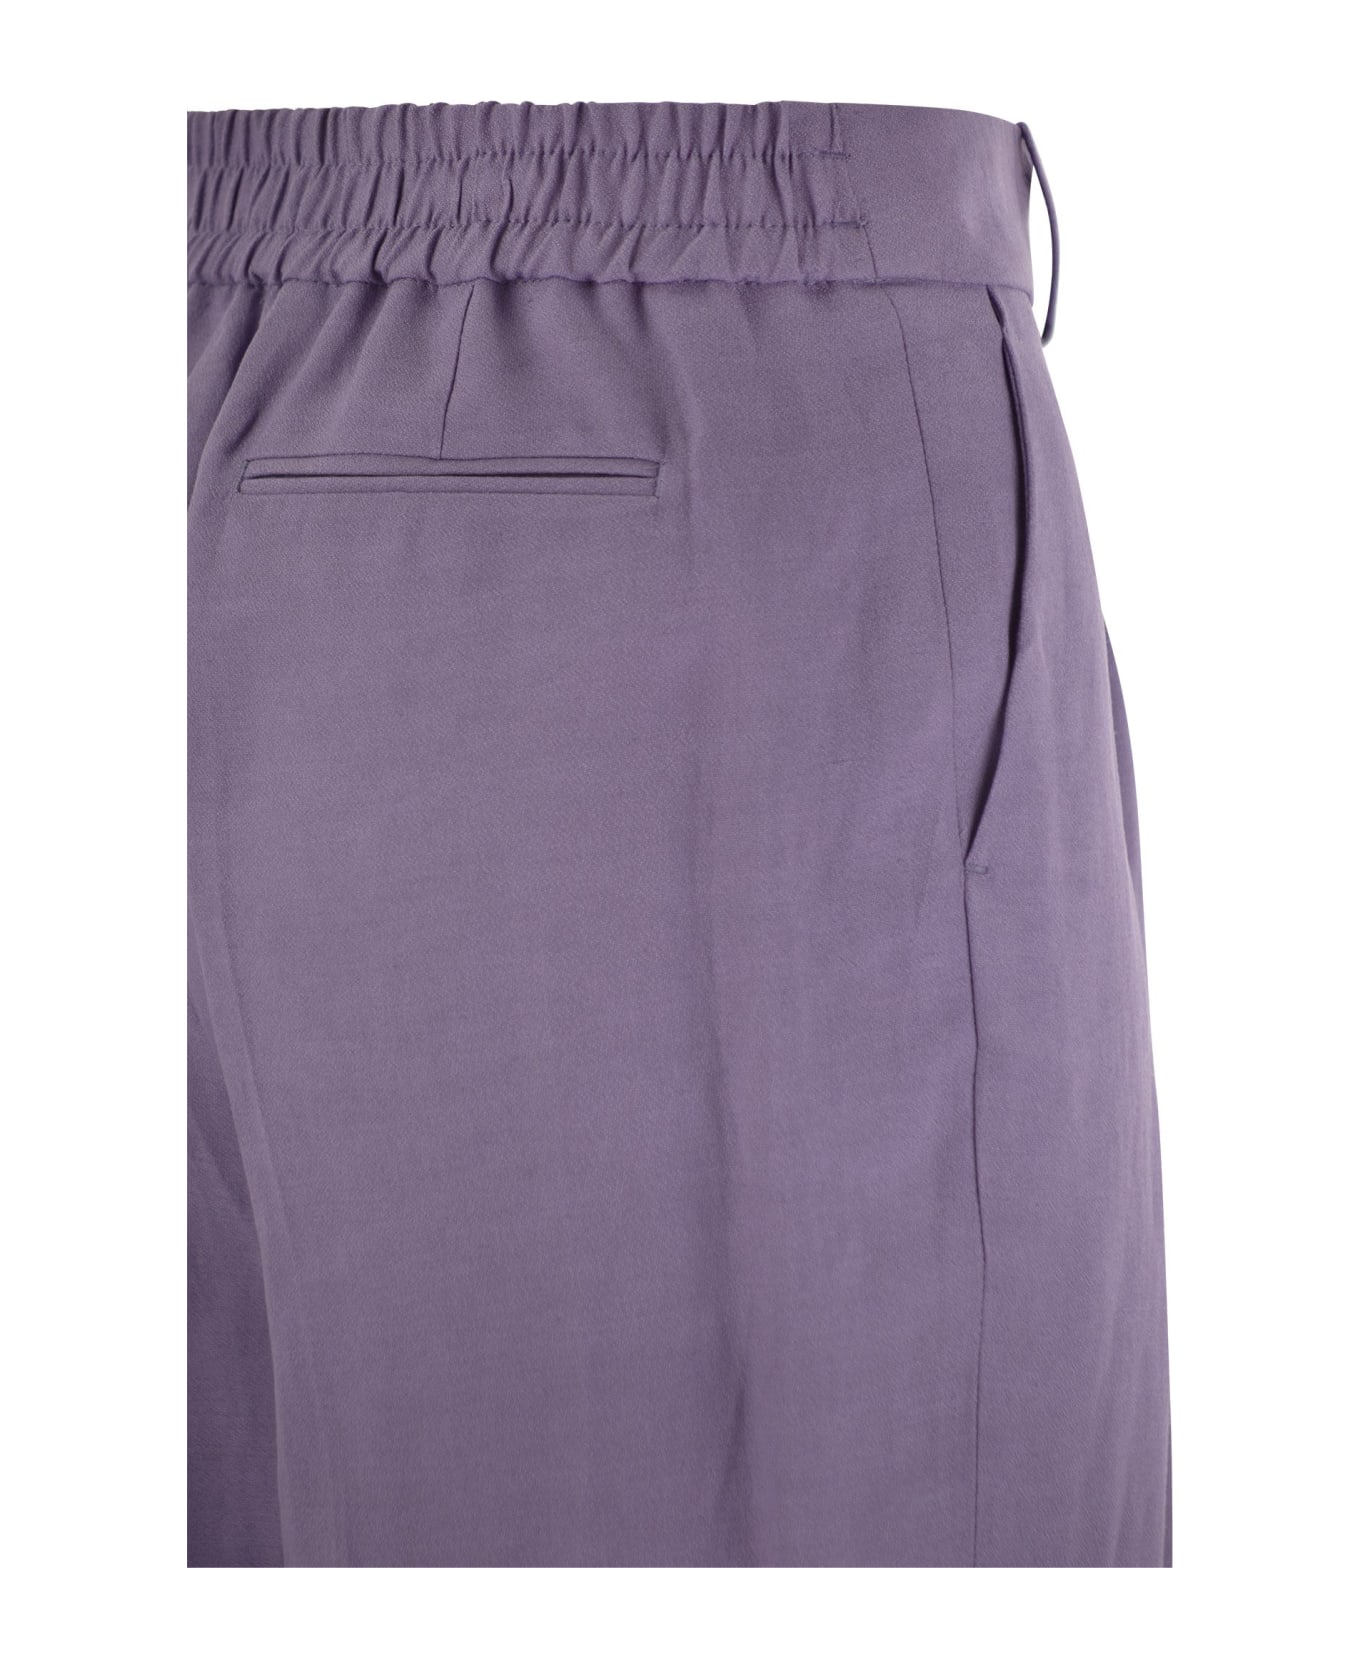 PT Torino Daisy - Viscose And Linen Trousers - Lilac